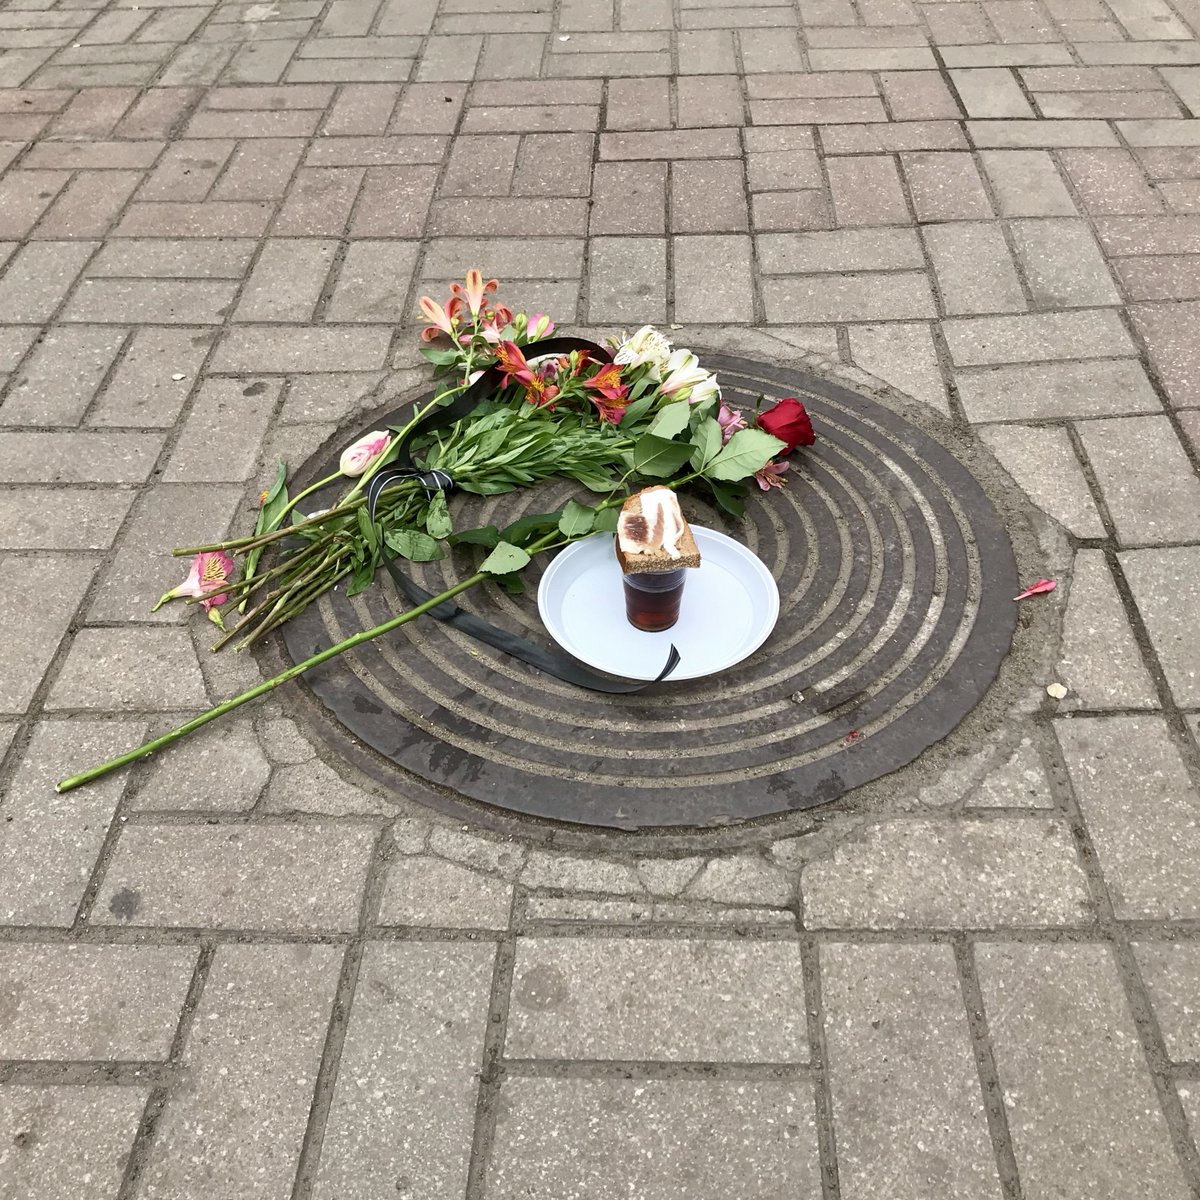 Nothing is sacred. This was left not far from the police station in remembrance of one of the fallen, and was quickly removed by the police. A resident told me ‘It’s like they are trying to erase the past, to cover up and pretend that this did not happen. Just like the nazis’.